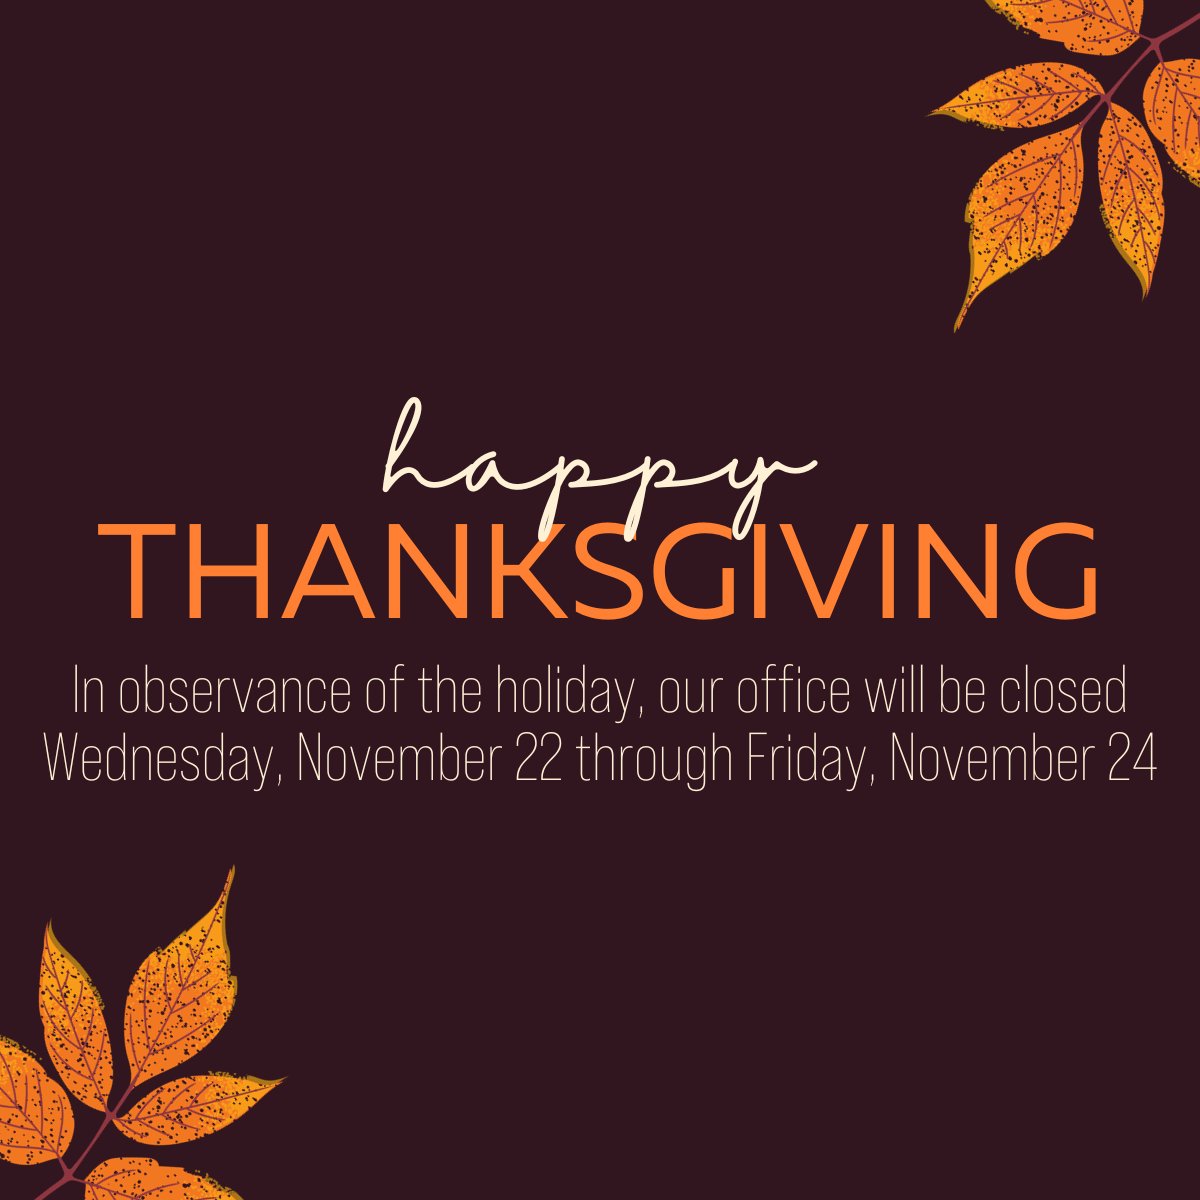 Reminder, neighbors - we are closed today through Friday in observance of Thanksgiving!